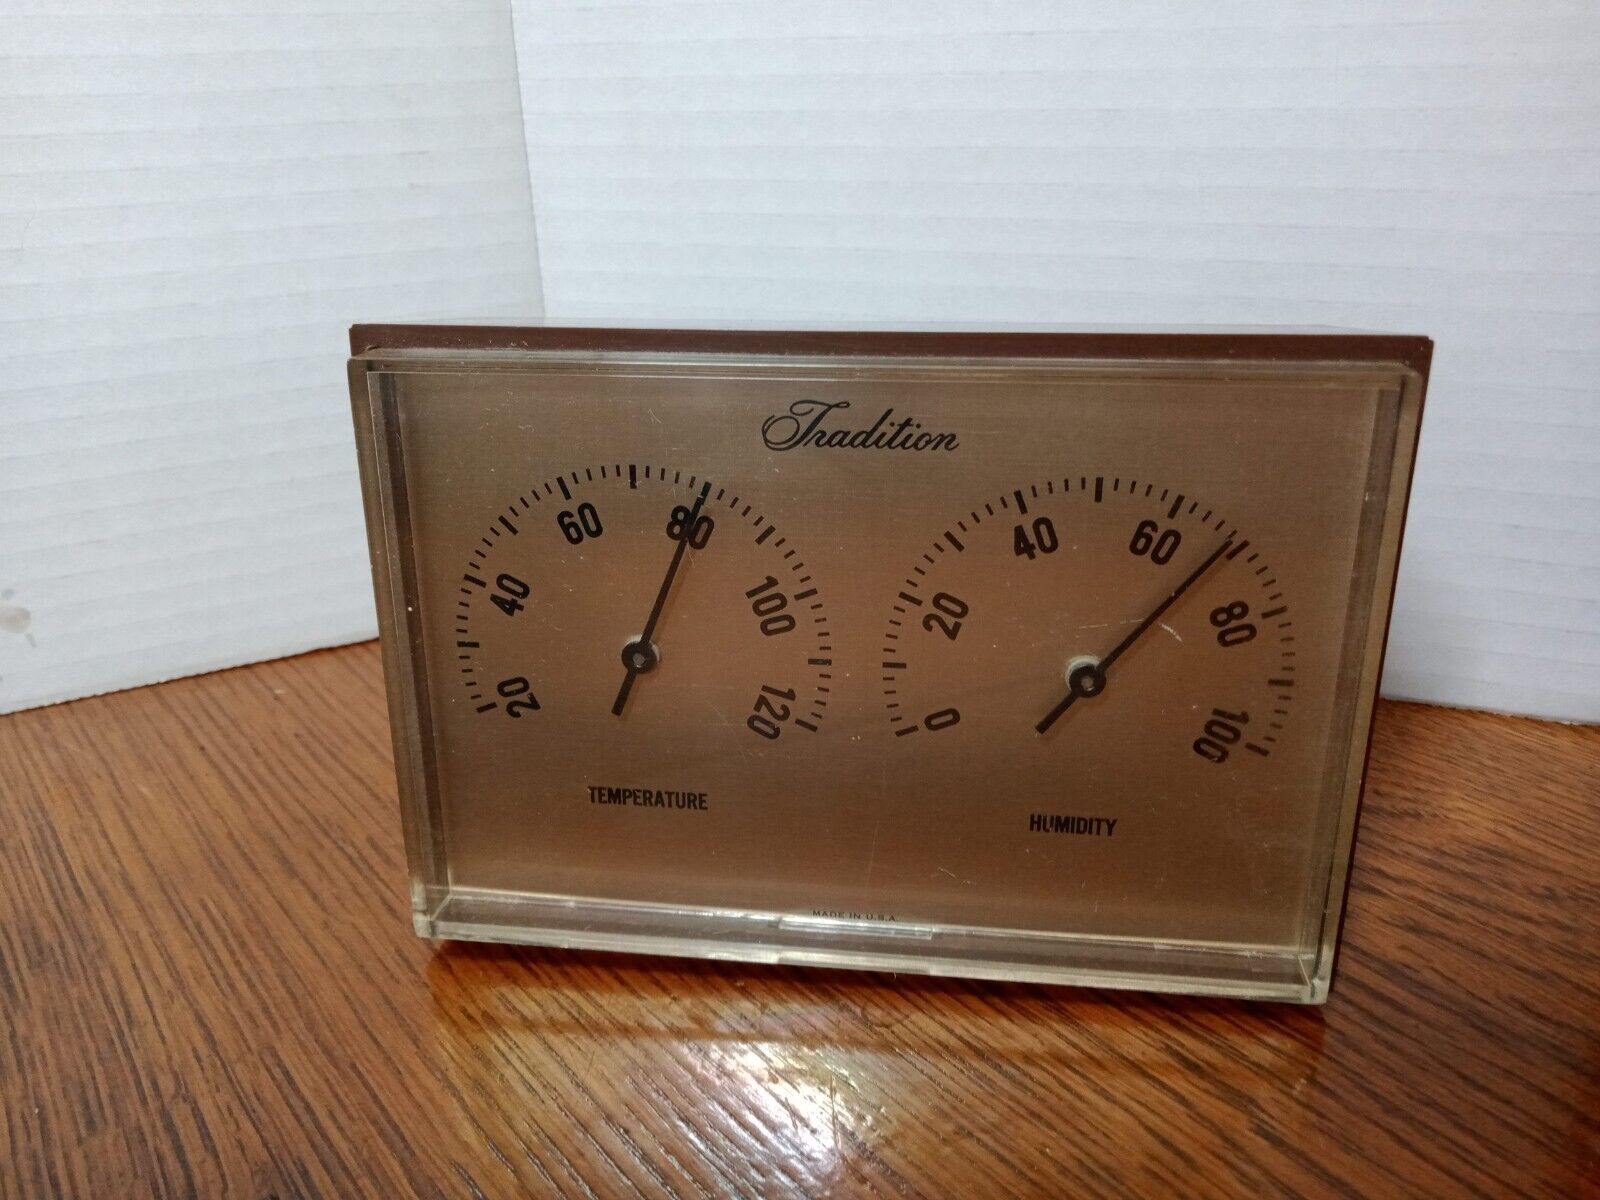 Vintage Sears Roebuck Tradition Weather Station #6579